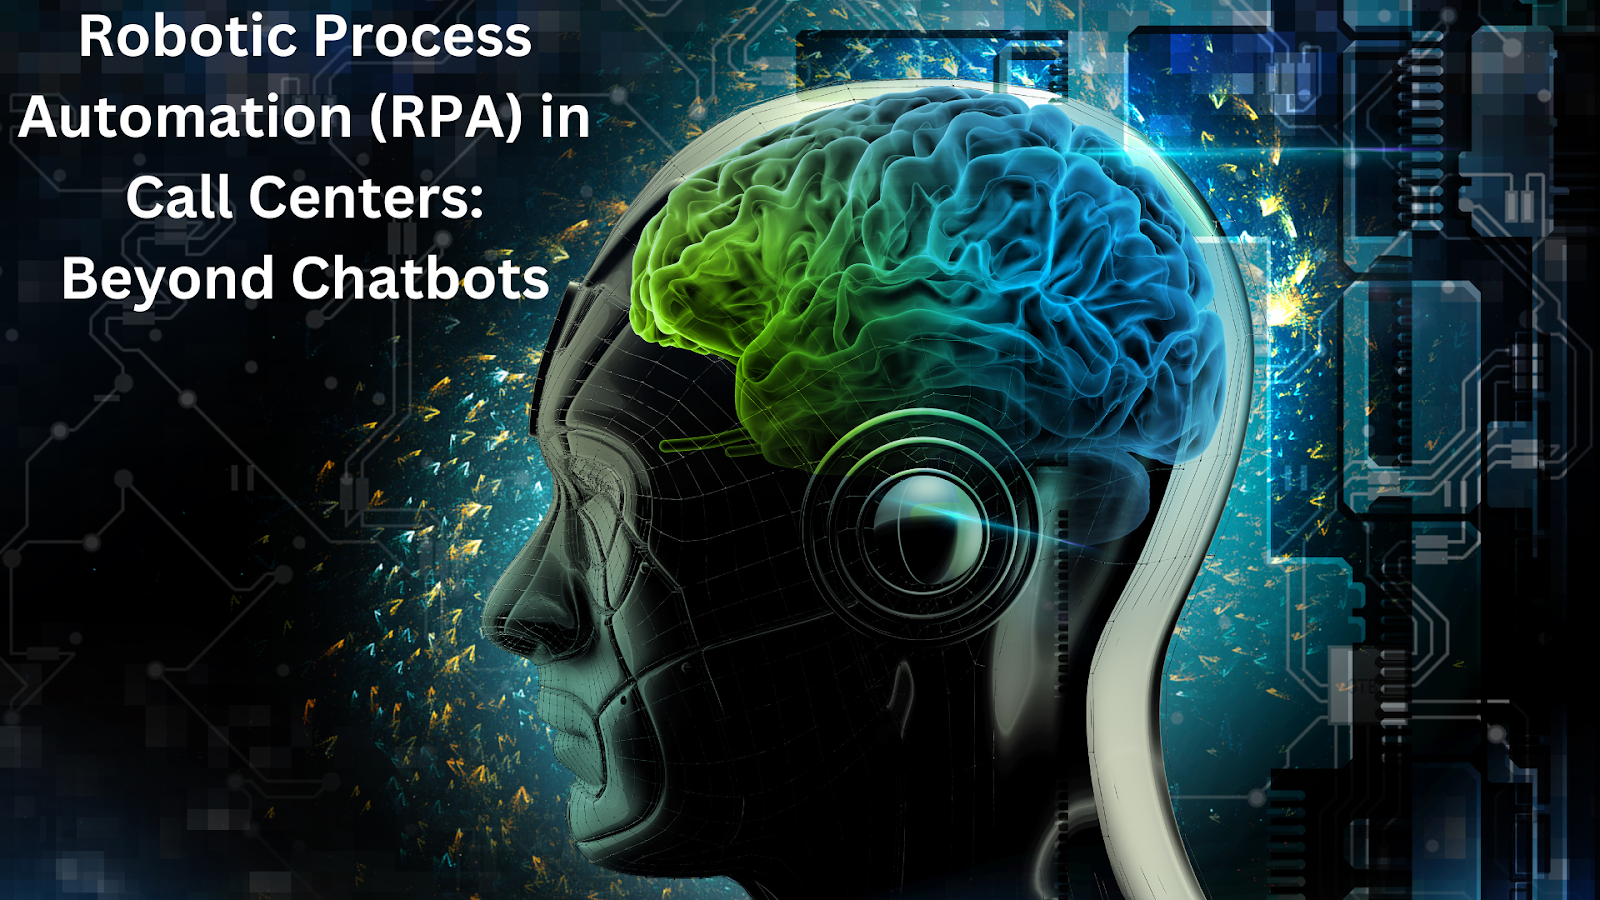 Robotic Process Automation (RPA) in Call Centers: Beyond Chatbots